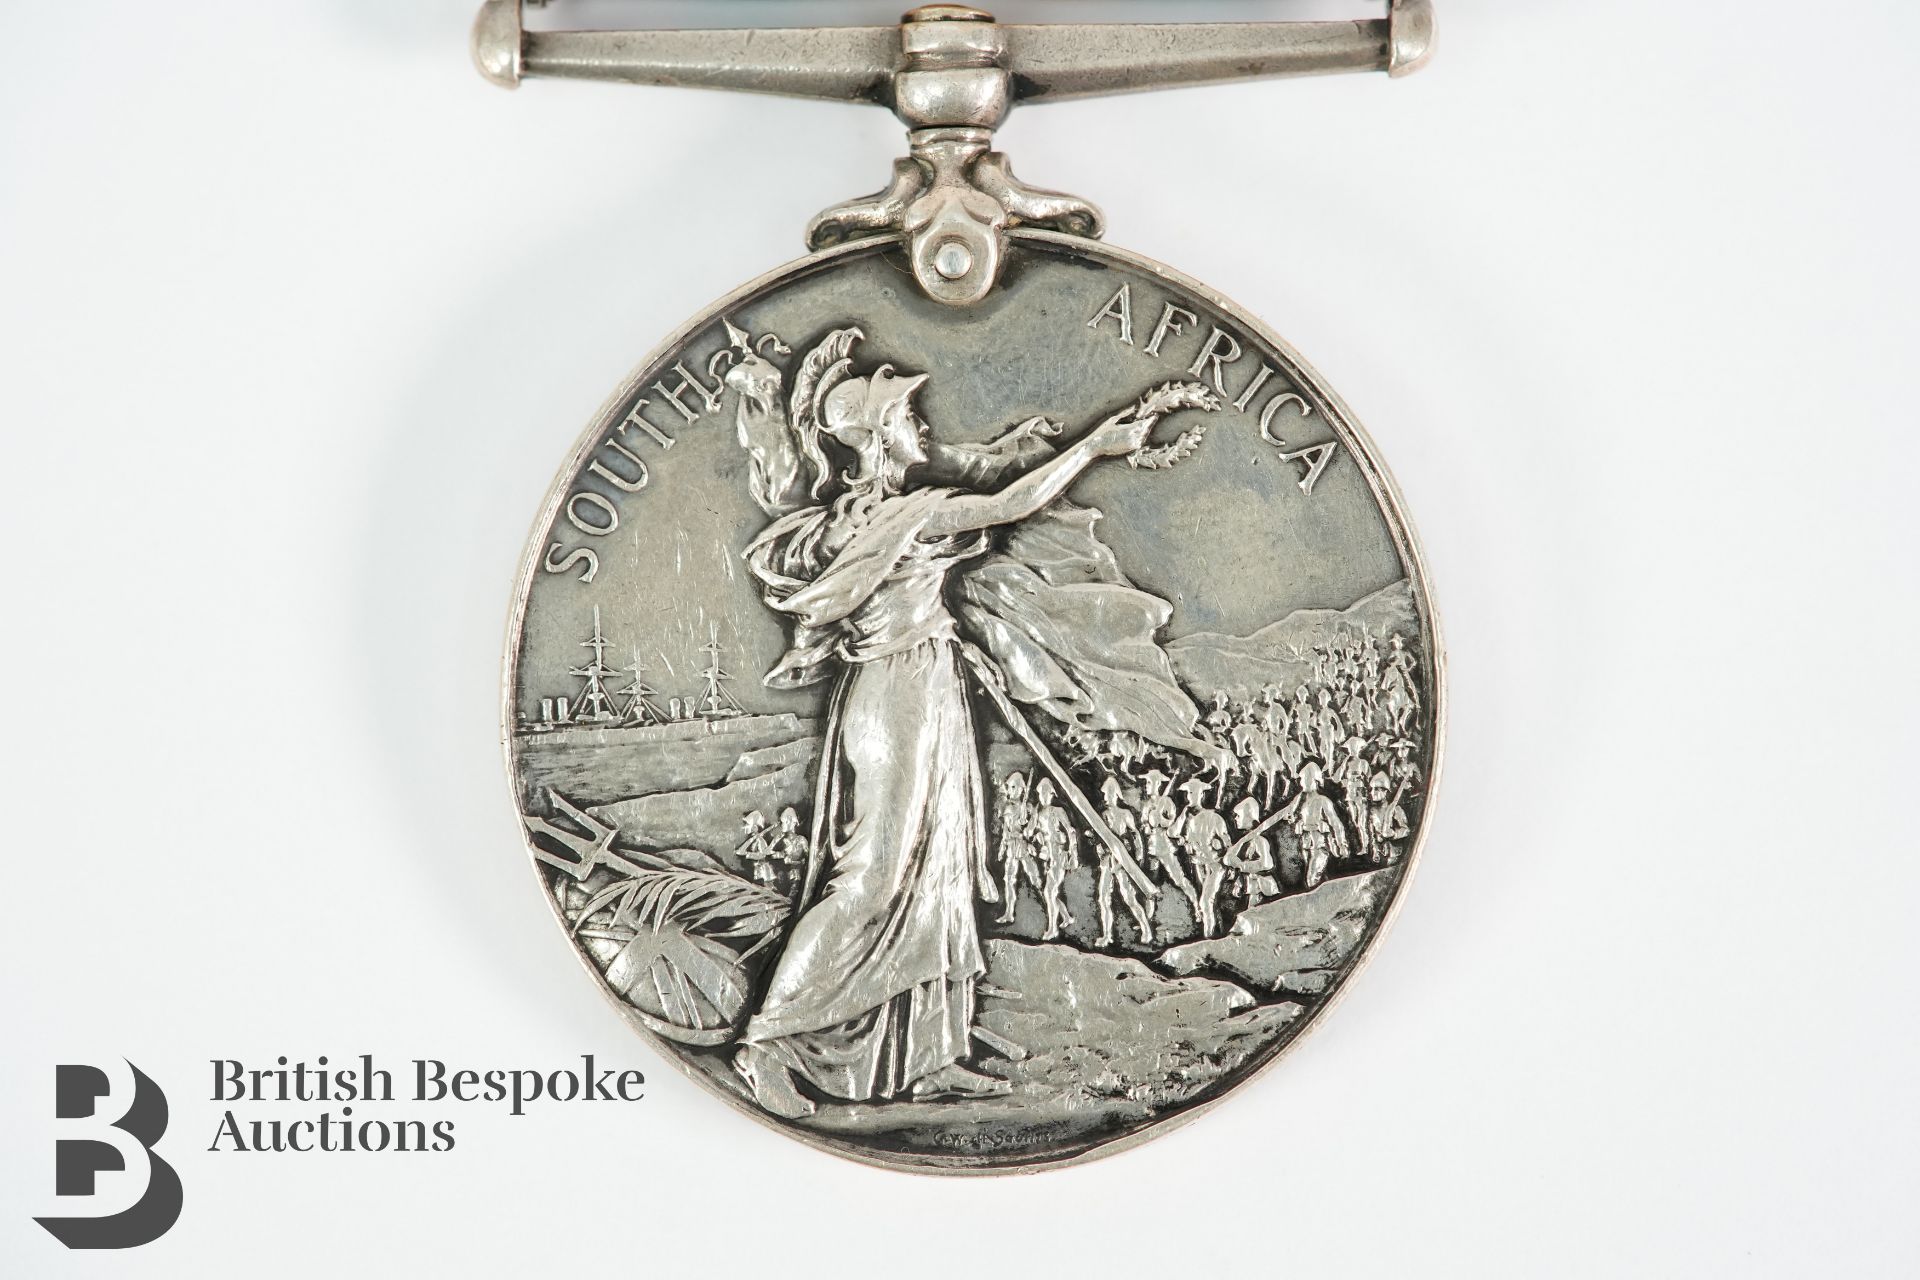 South Africa Campaign Medal - Image 4 of 4